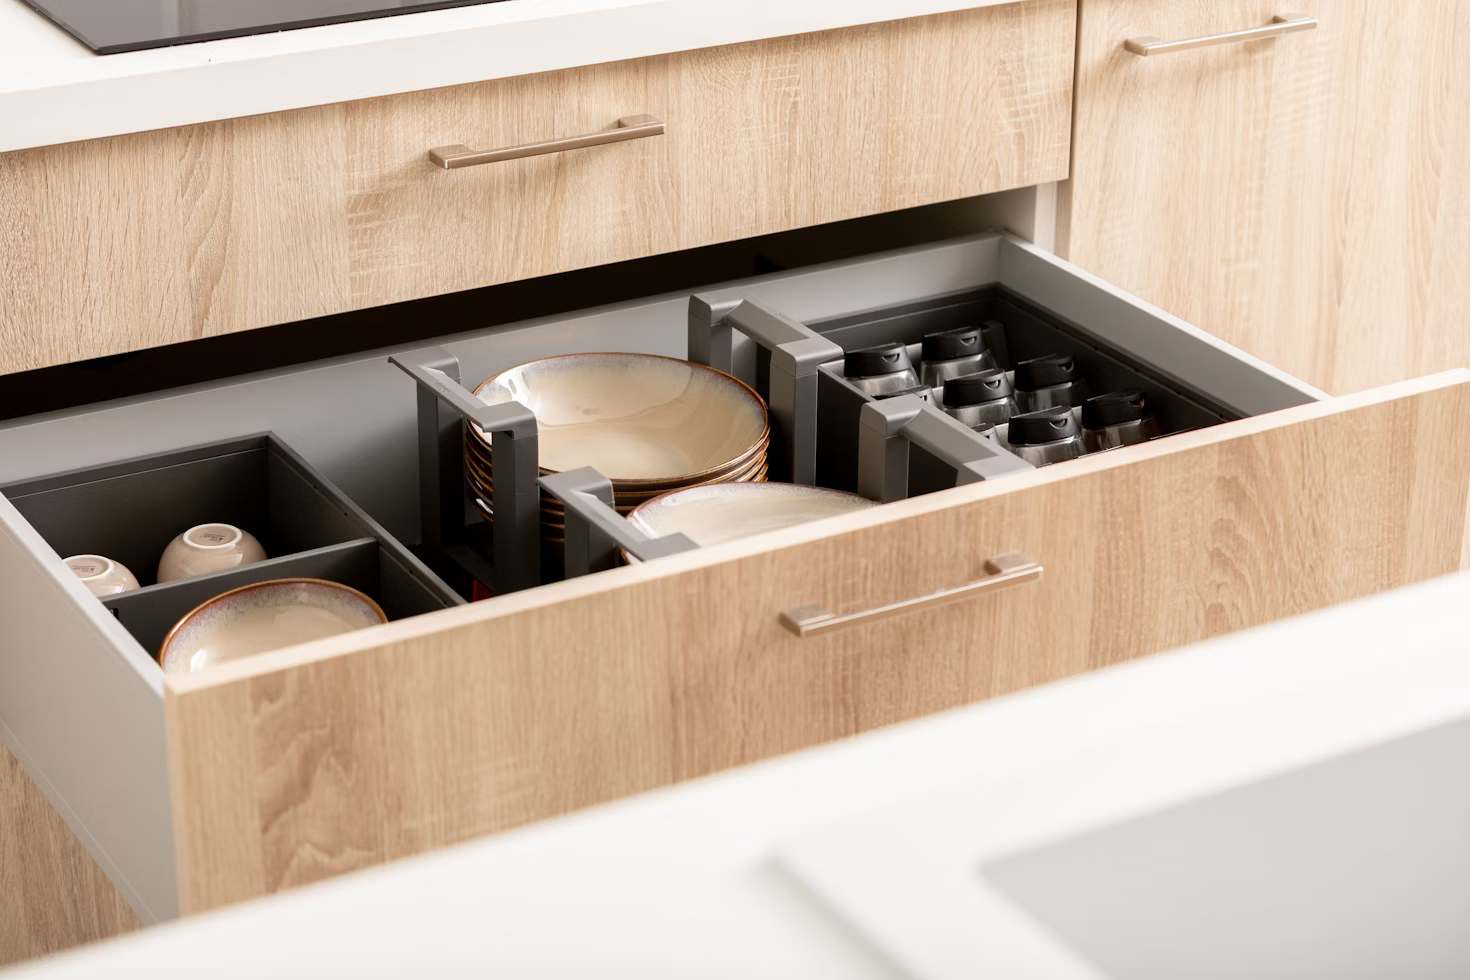 Organized kitchen drawers with plates, spices and cups in drawer organizers